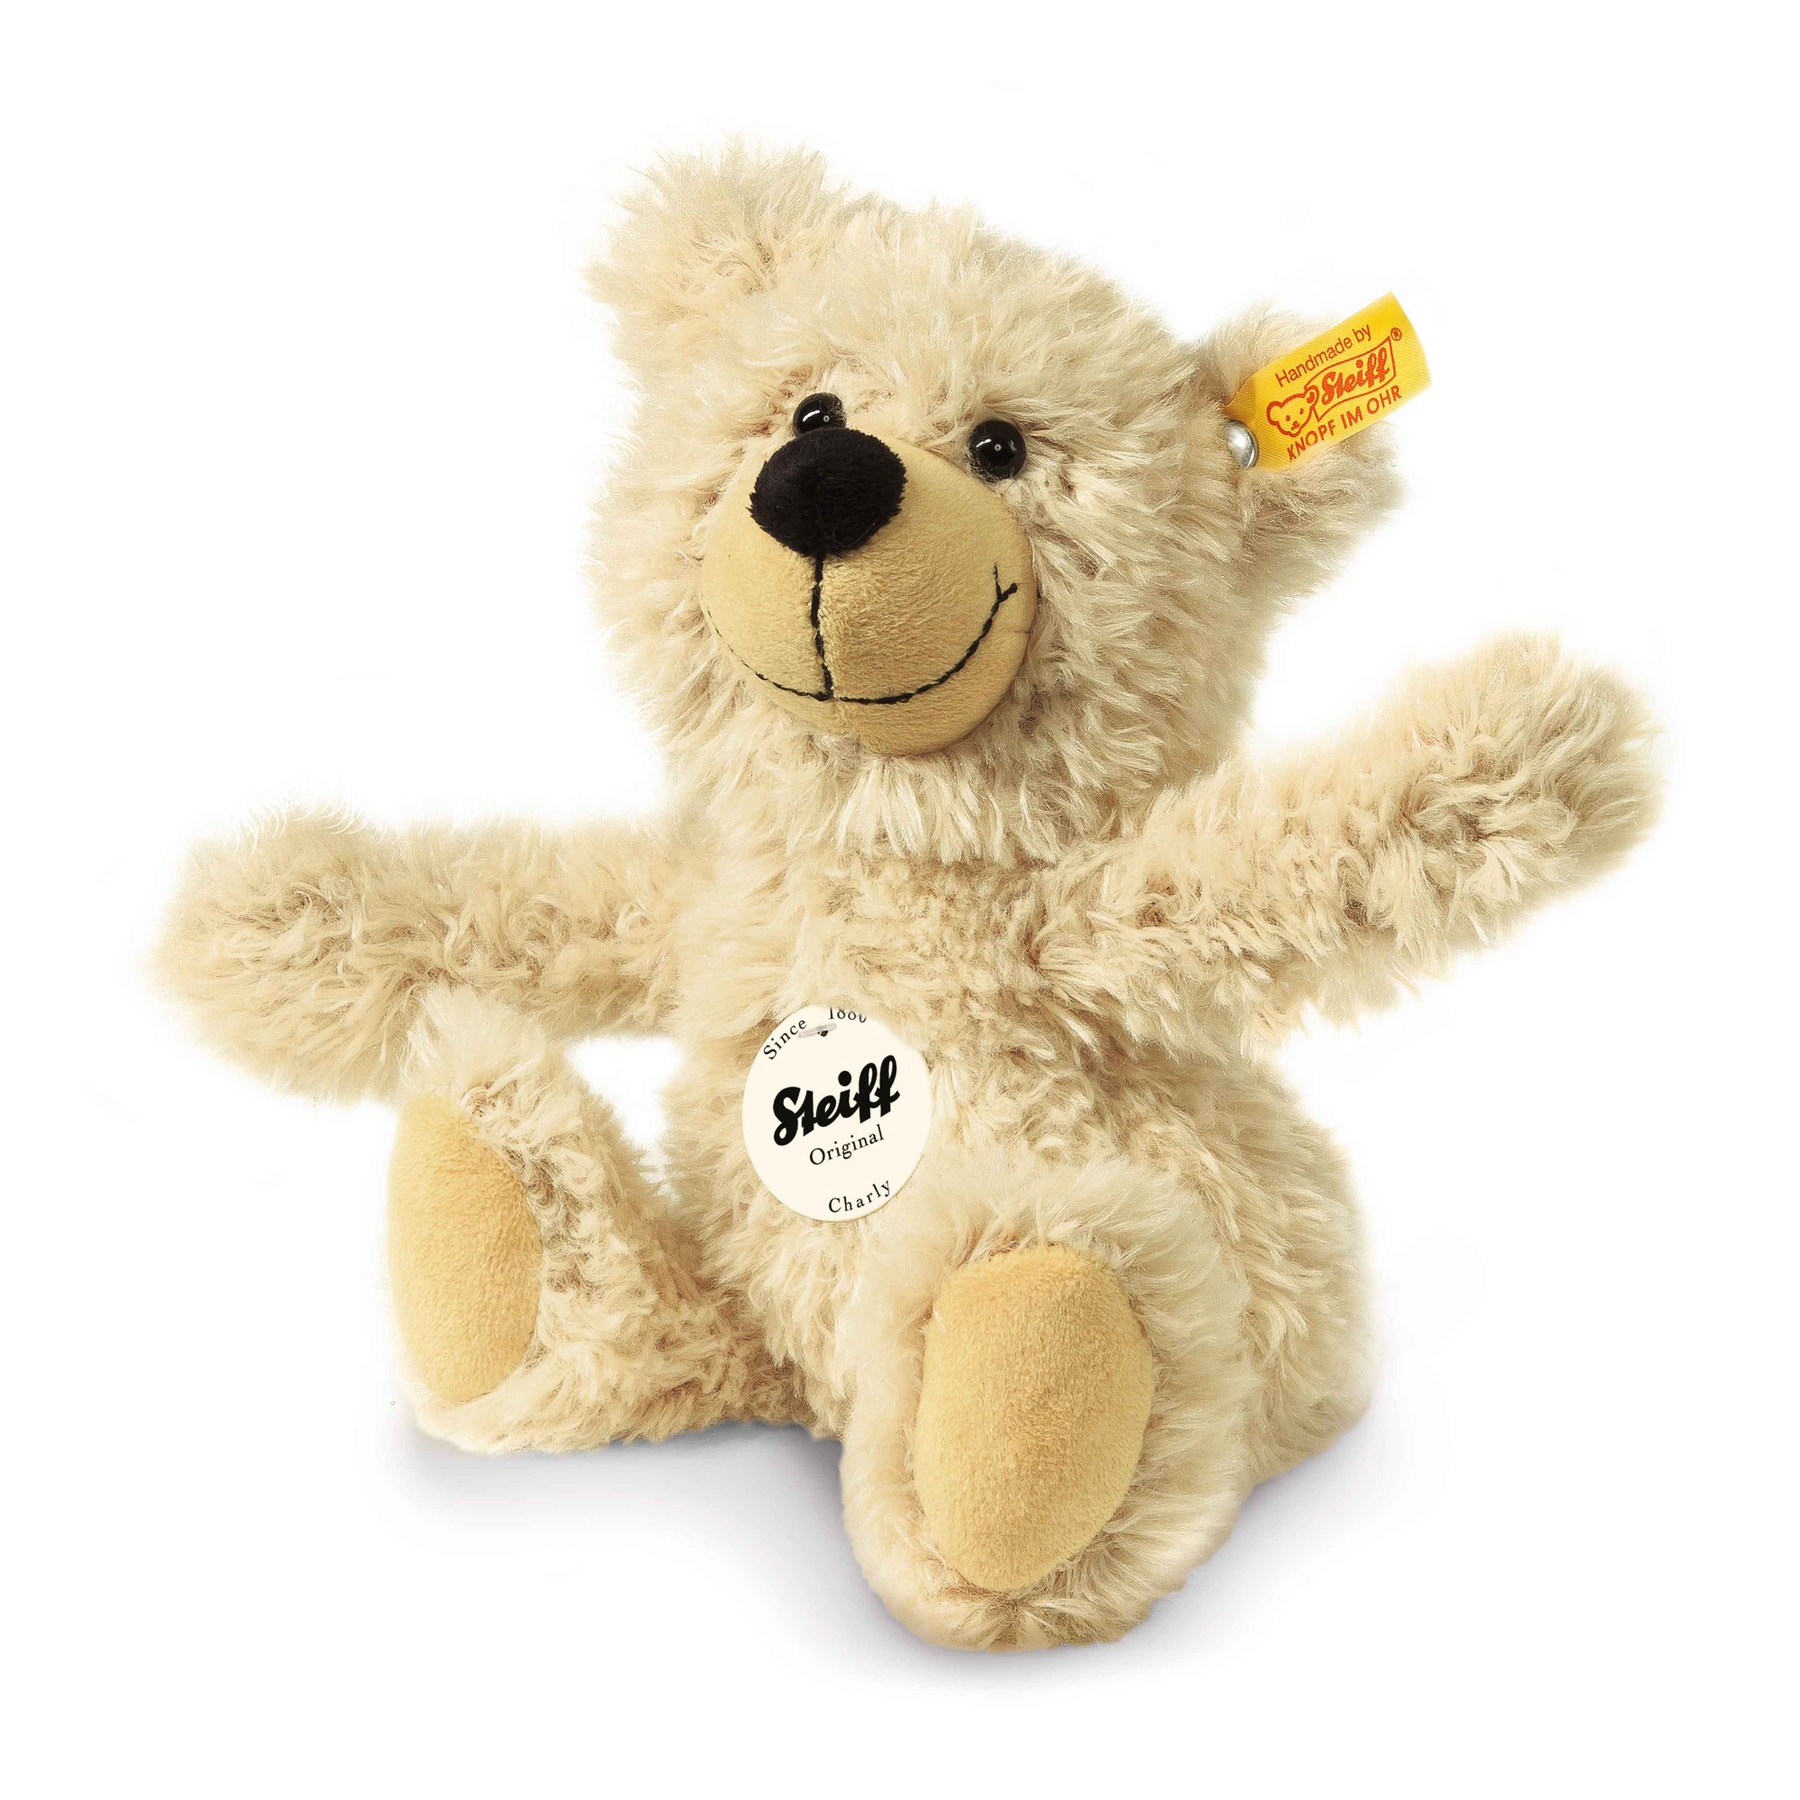 Ours Teddy-pantin Charly